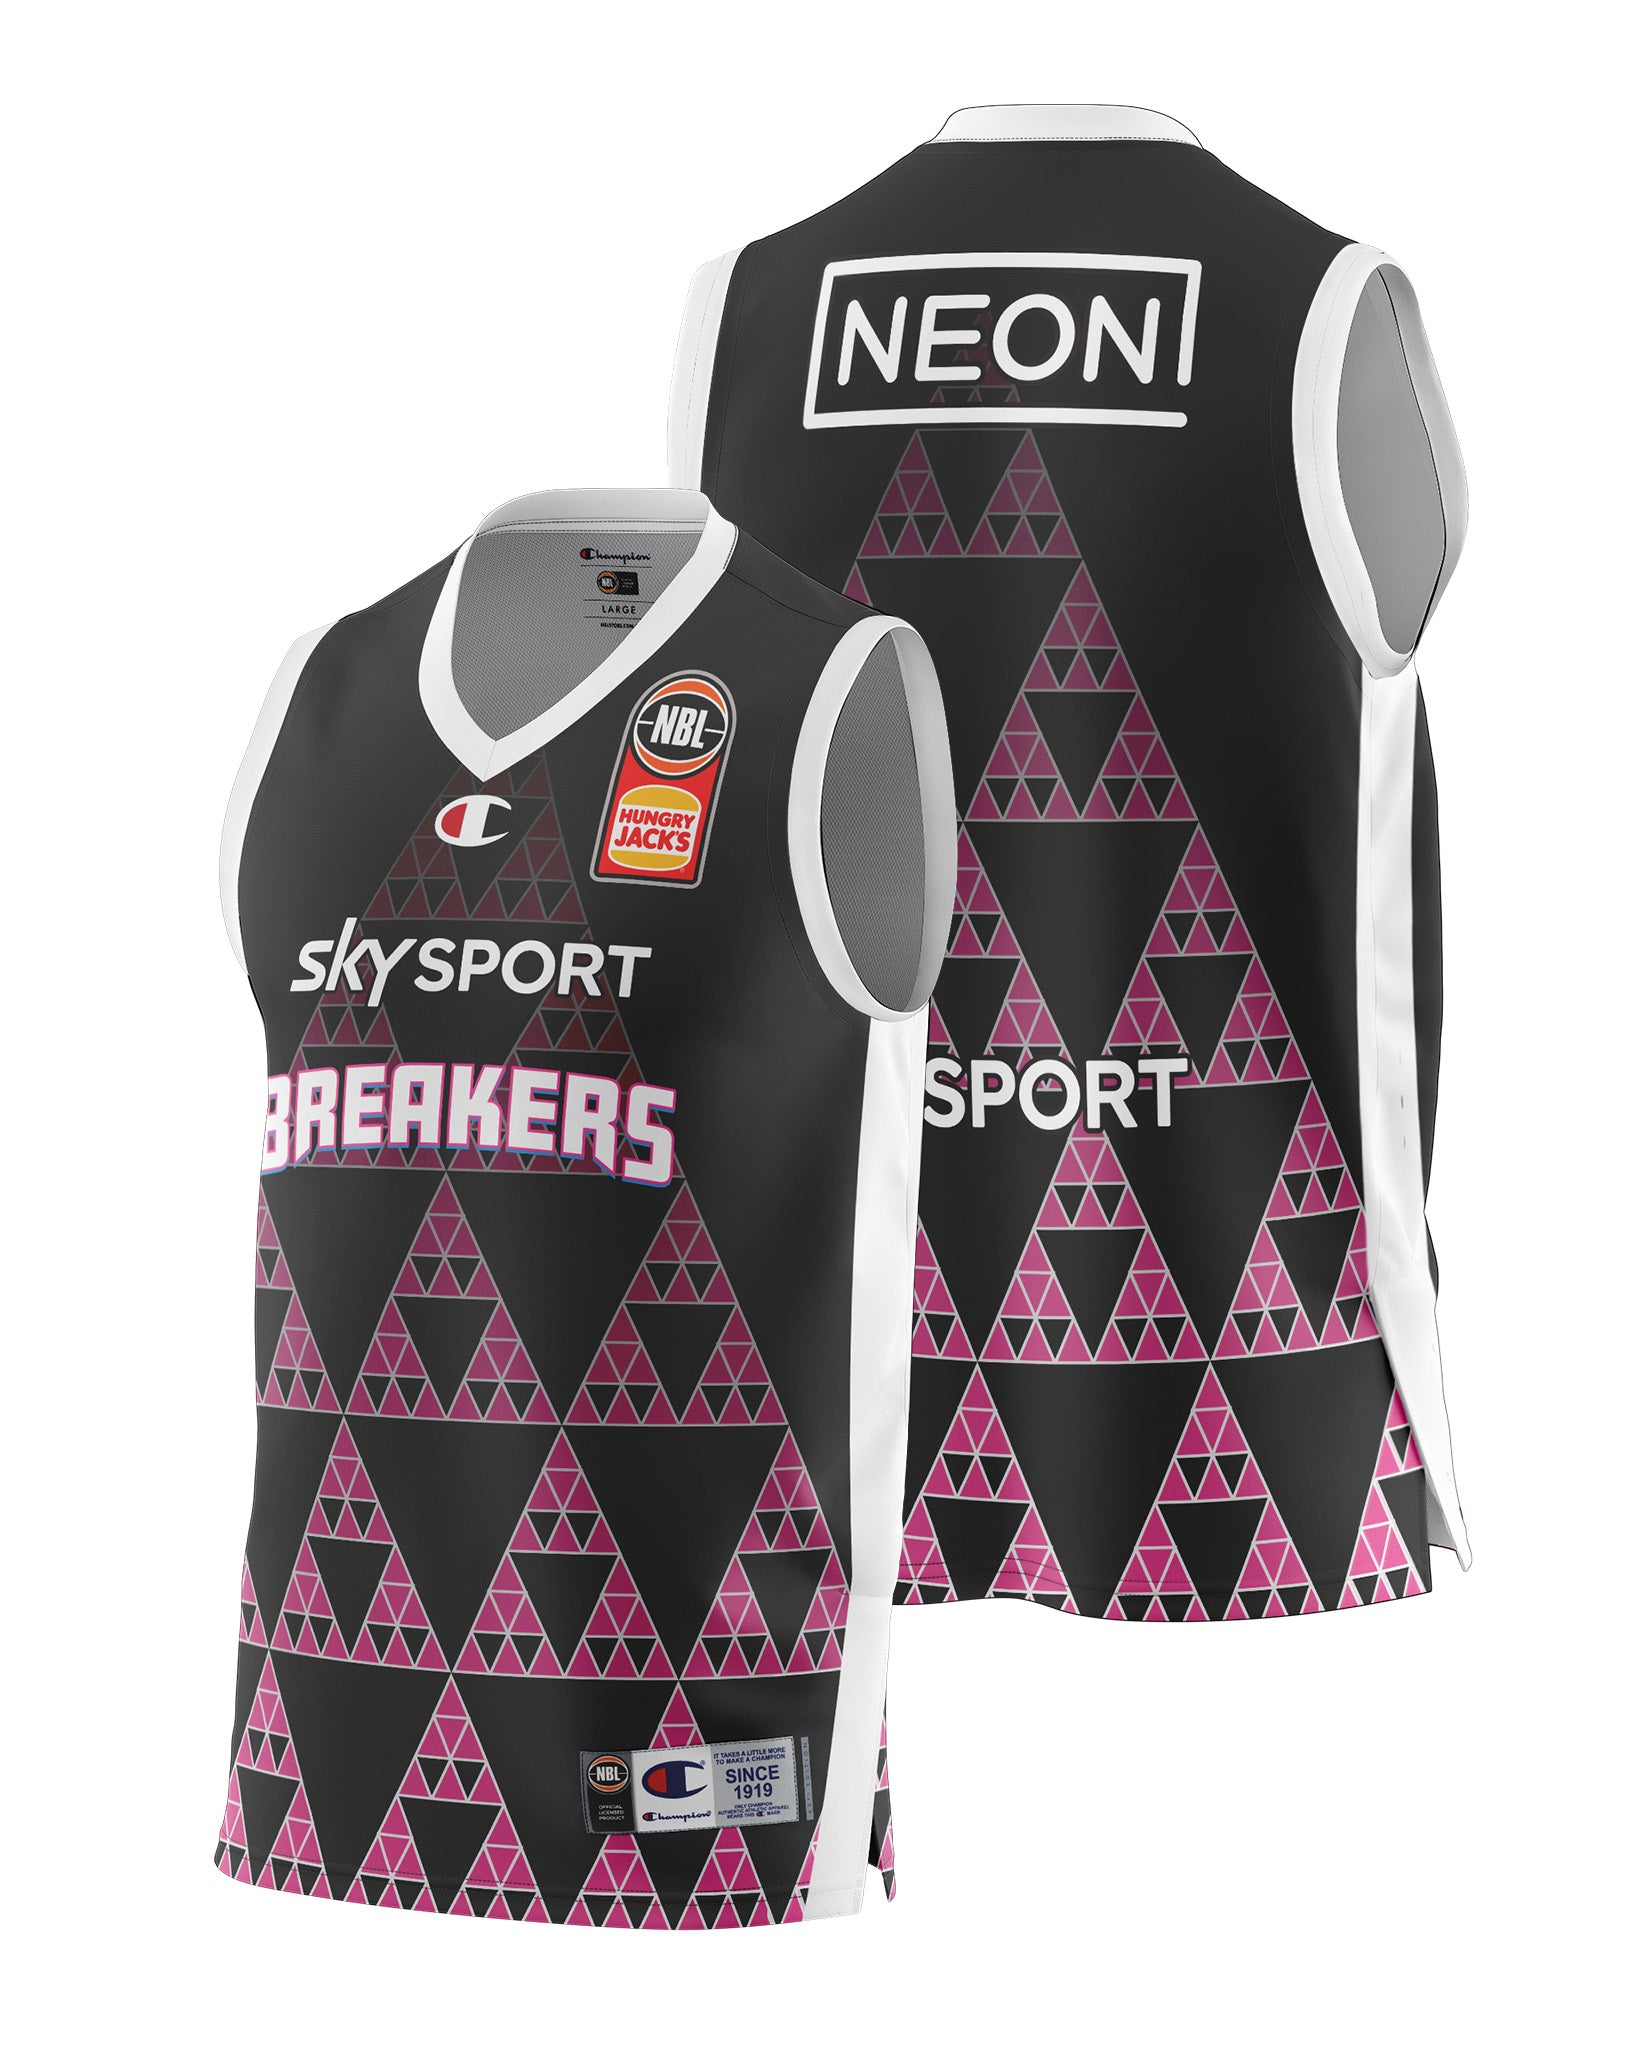 NBL - The #NBL20 Indigenous Jerseys are now available